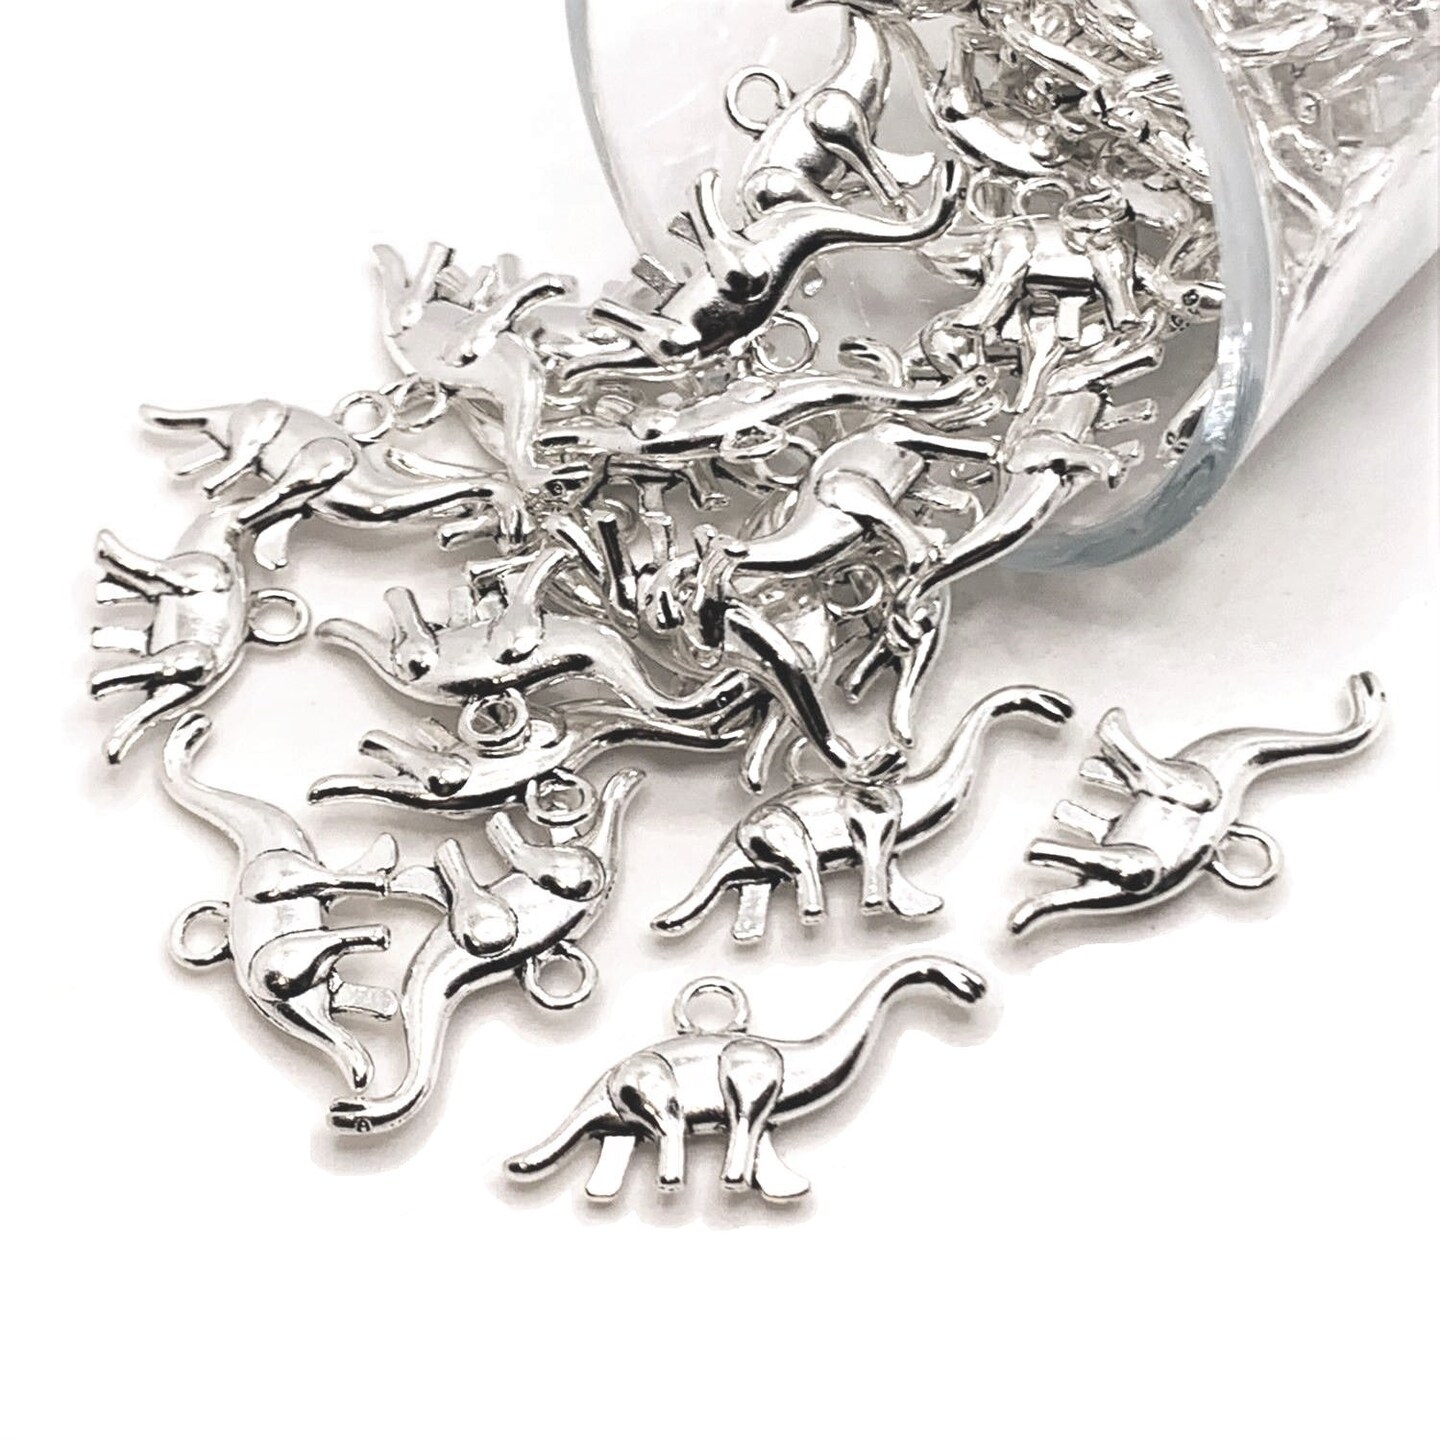 4, 20 or 50 Pieces: Silver Brontosaurus Dinosaur Charms - Double Sided